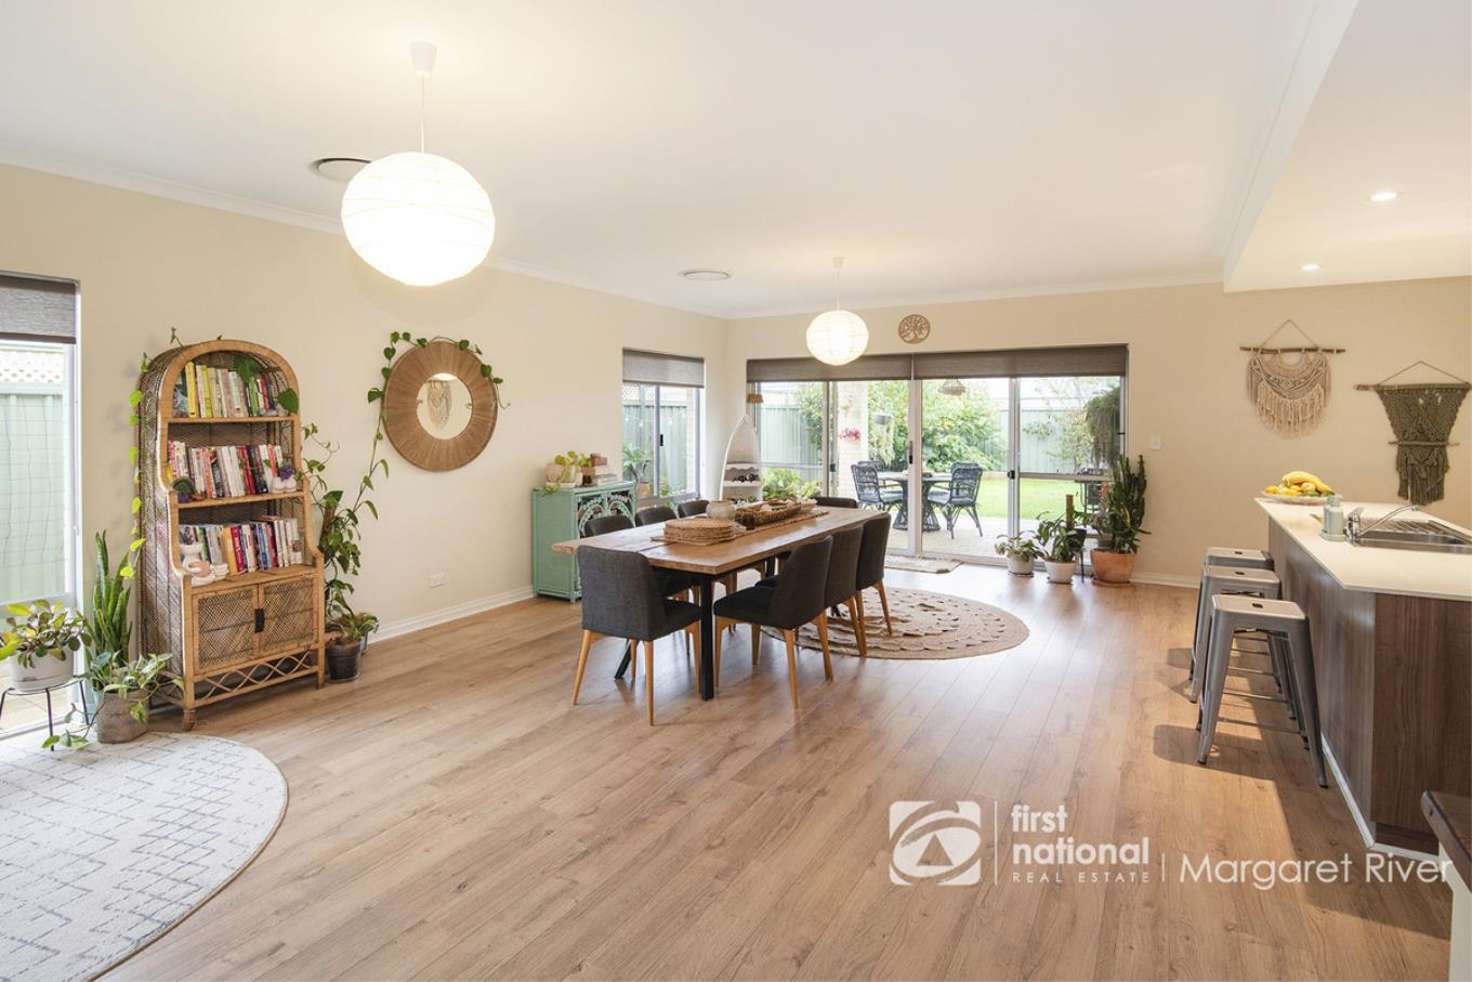 Main view of Homely house listing, 3 Dryandra Drive, Margaret River WA 6285